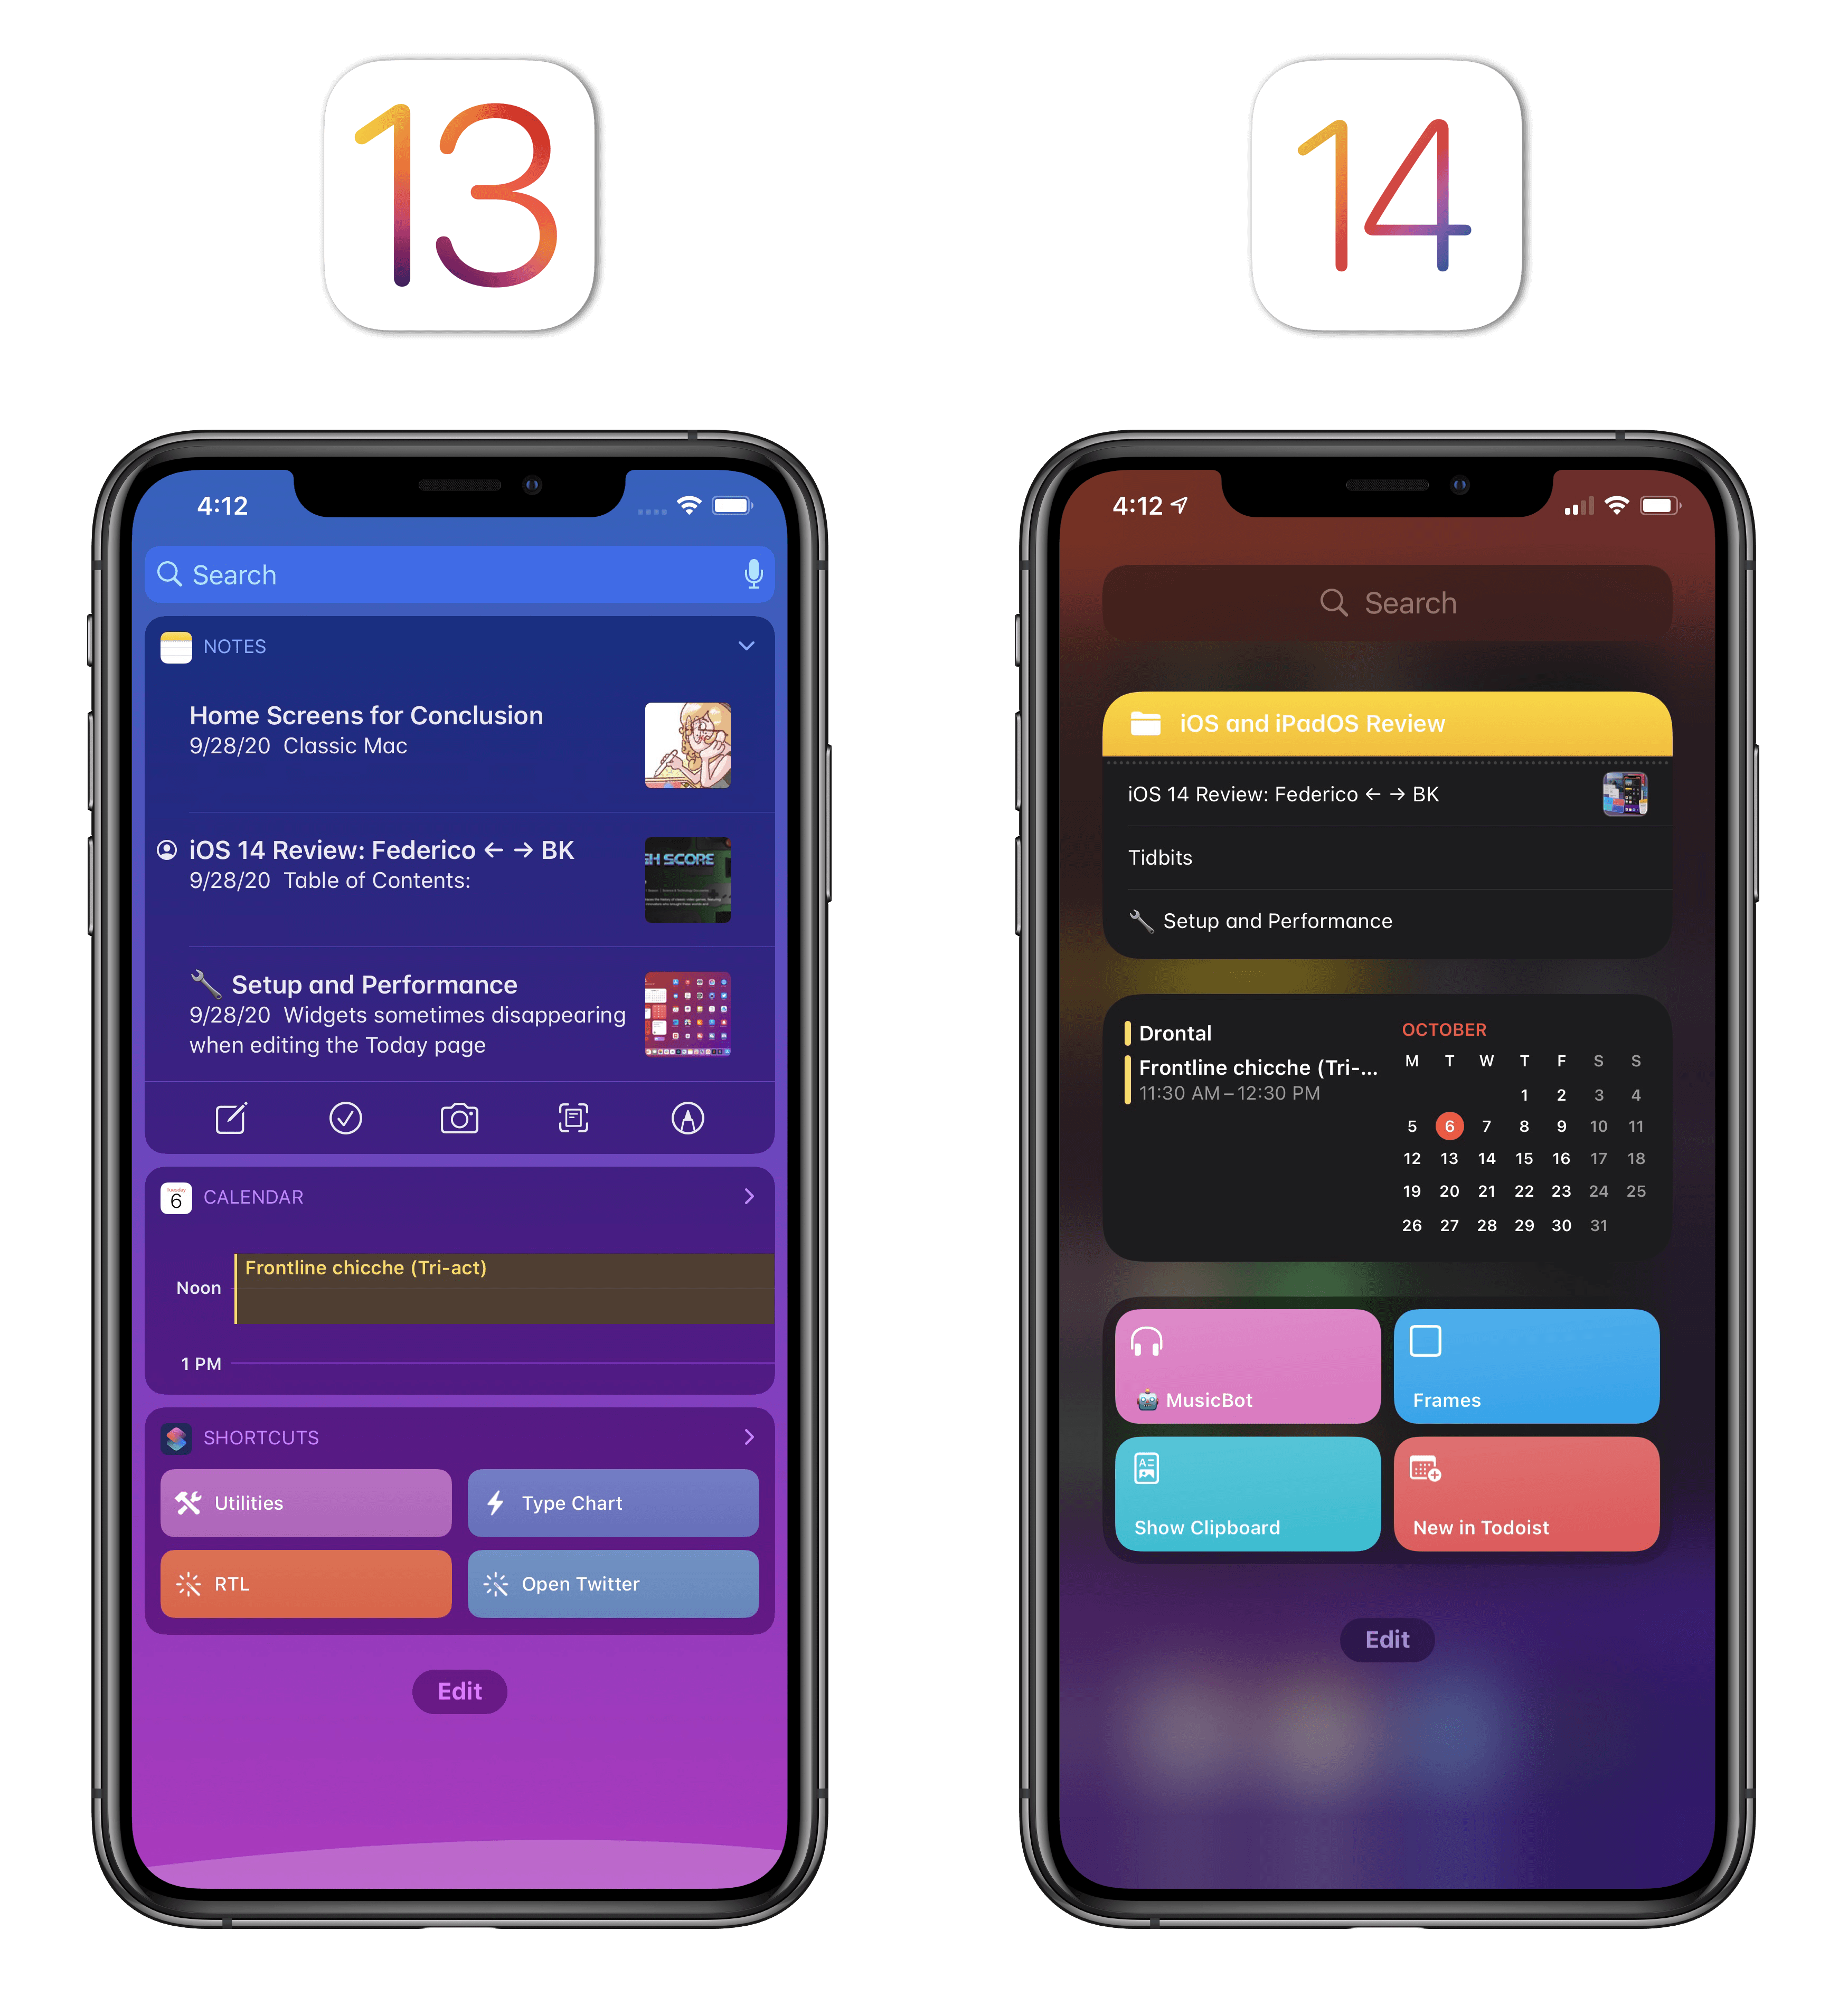 Widgets in iOS 14 can use more complex layouts thanks to SwiftUI.